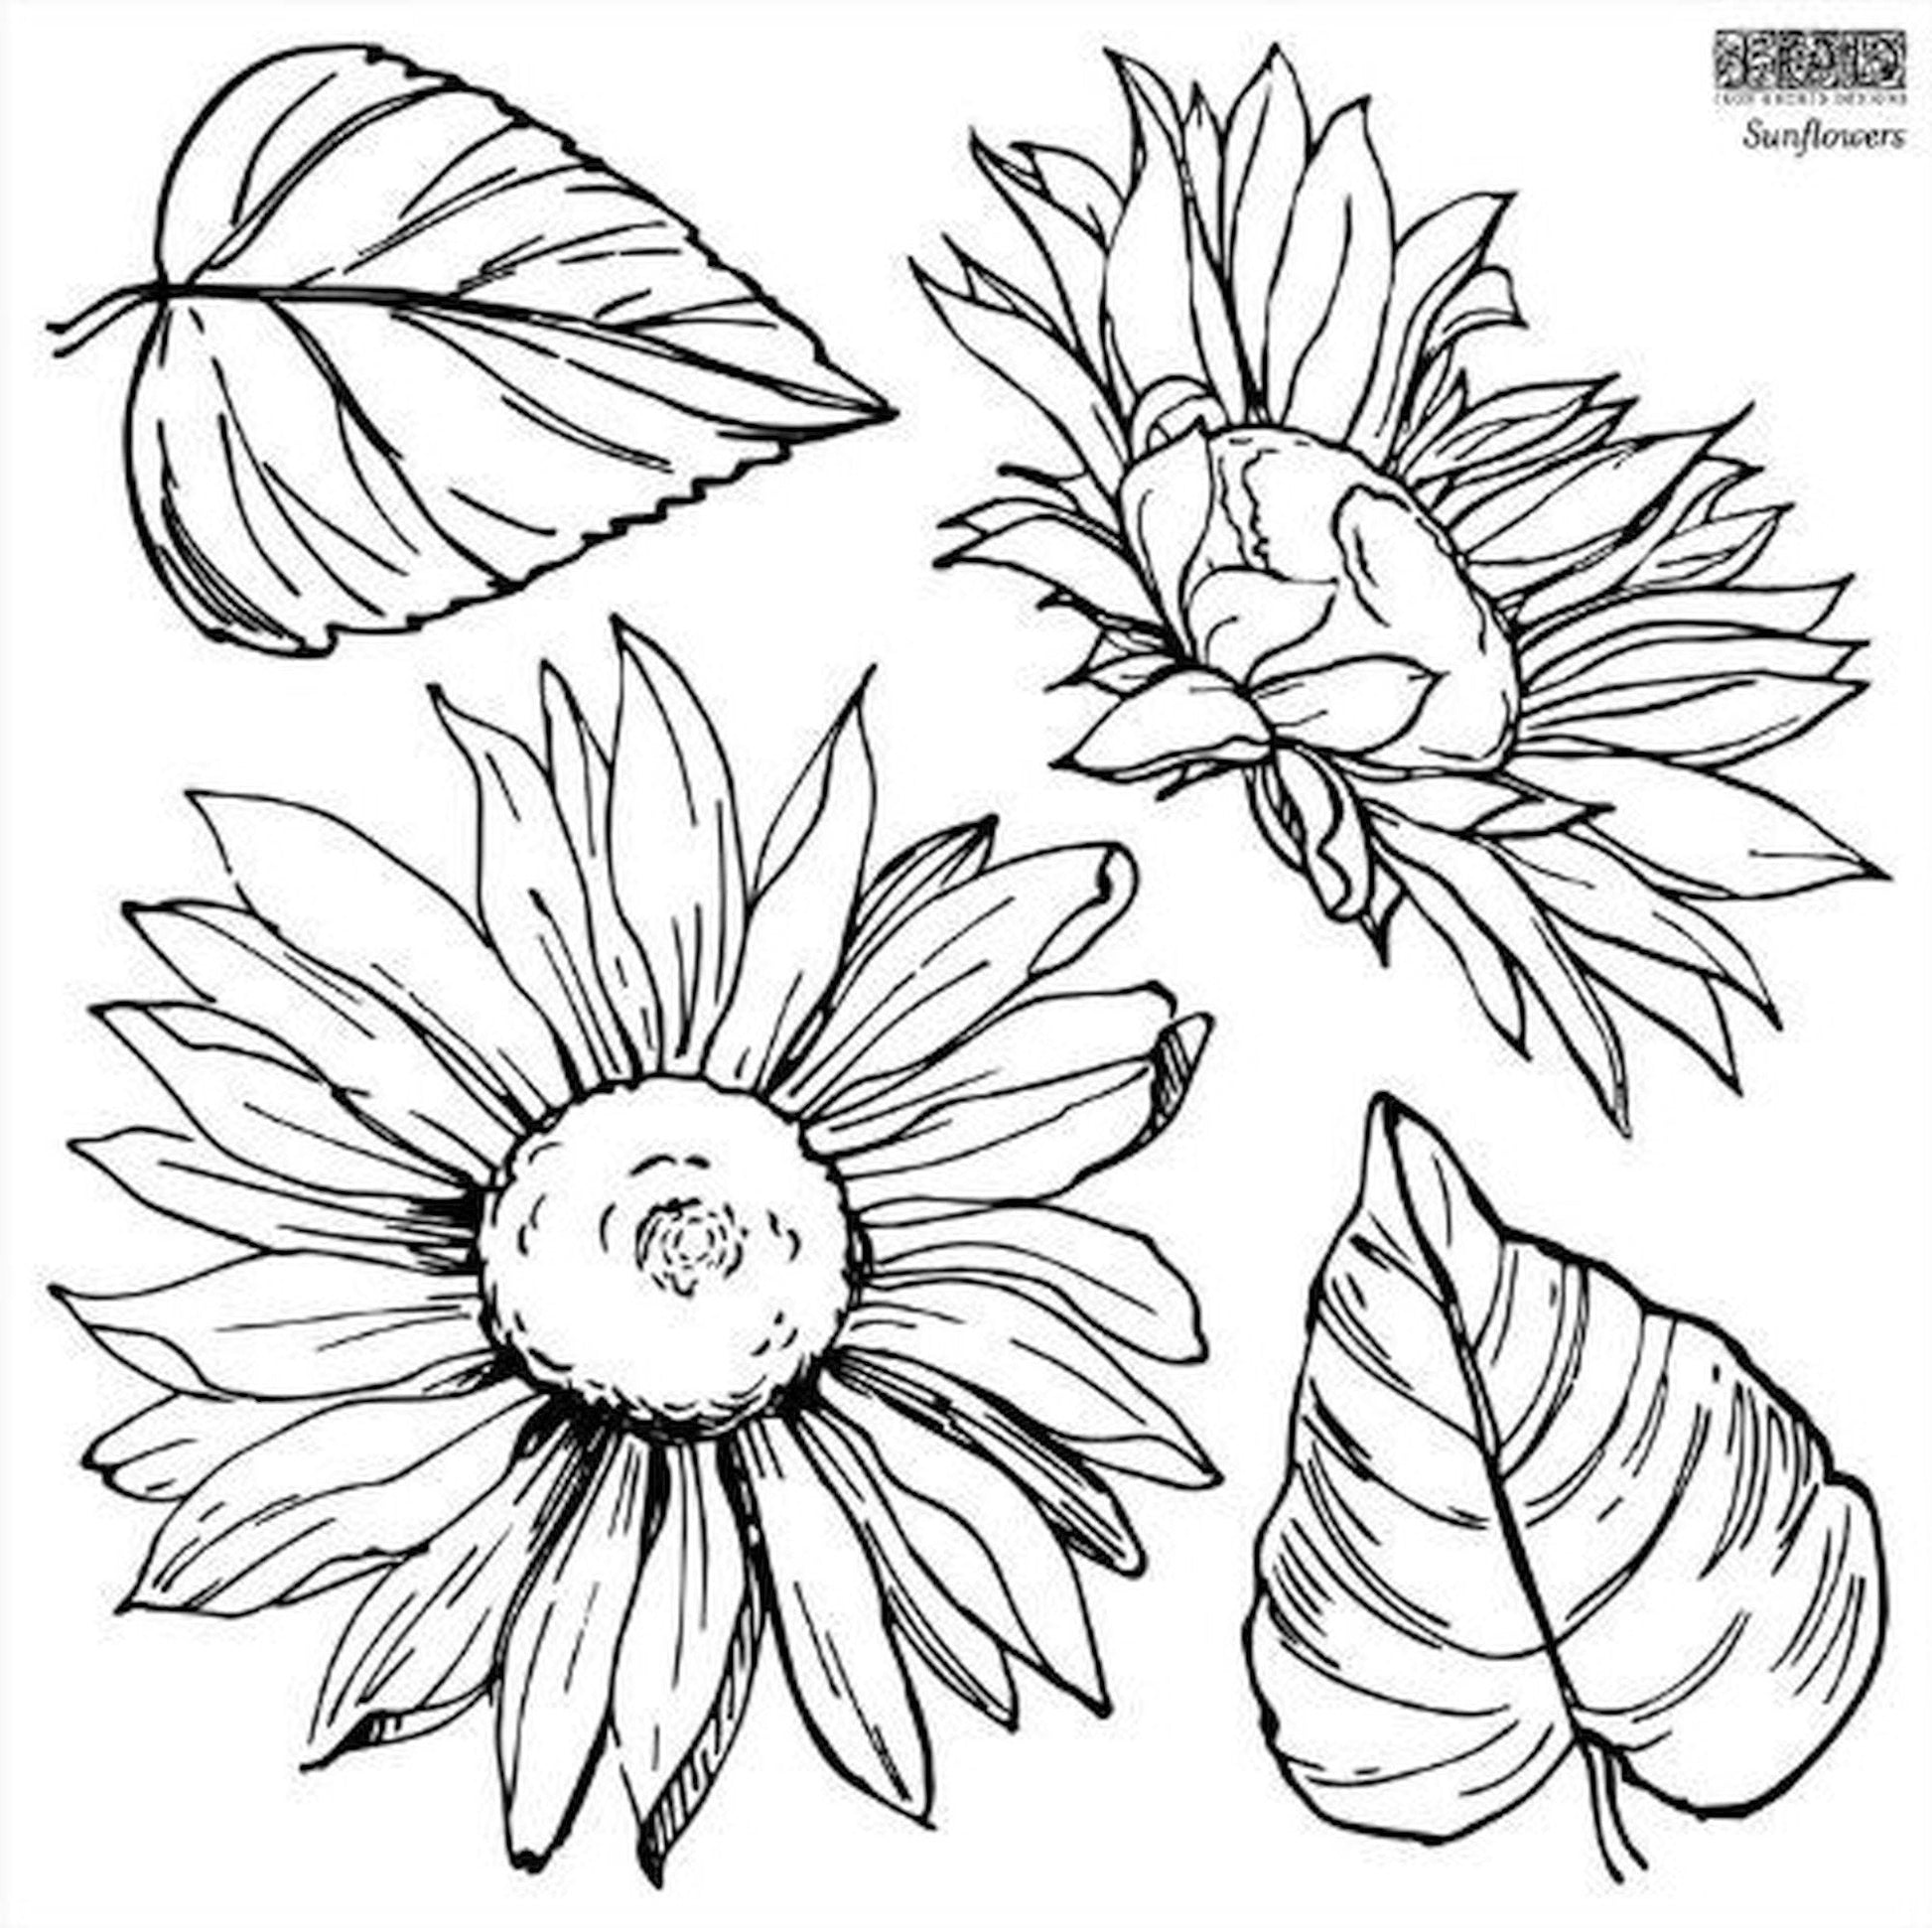 Iron Orchid Designs - Sunflowers Decor Stamp - Rustic River Home